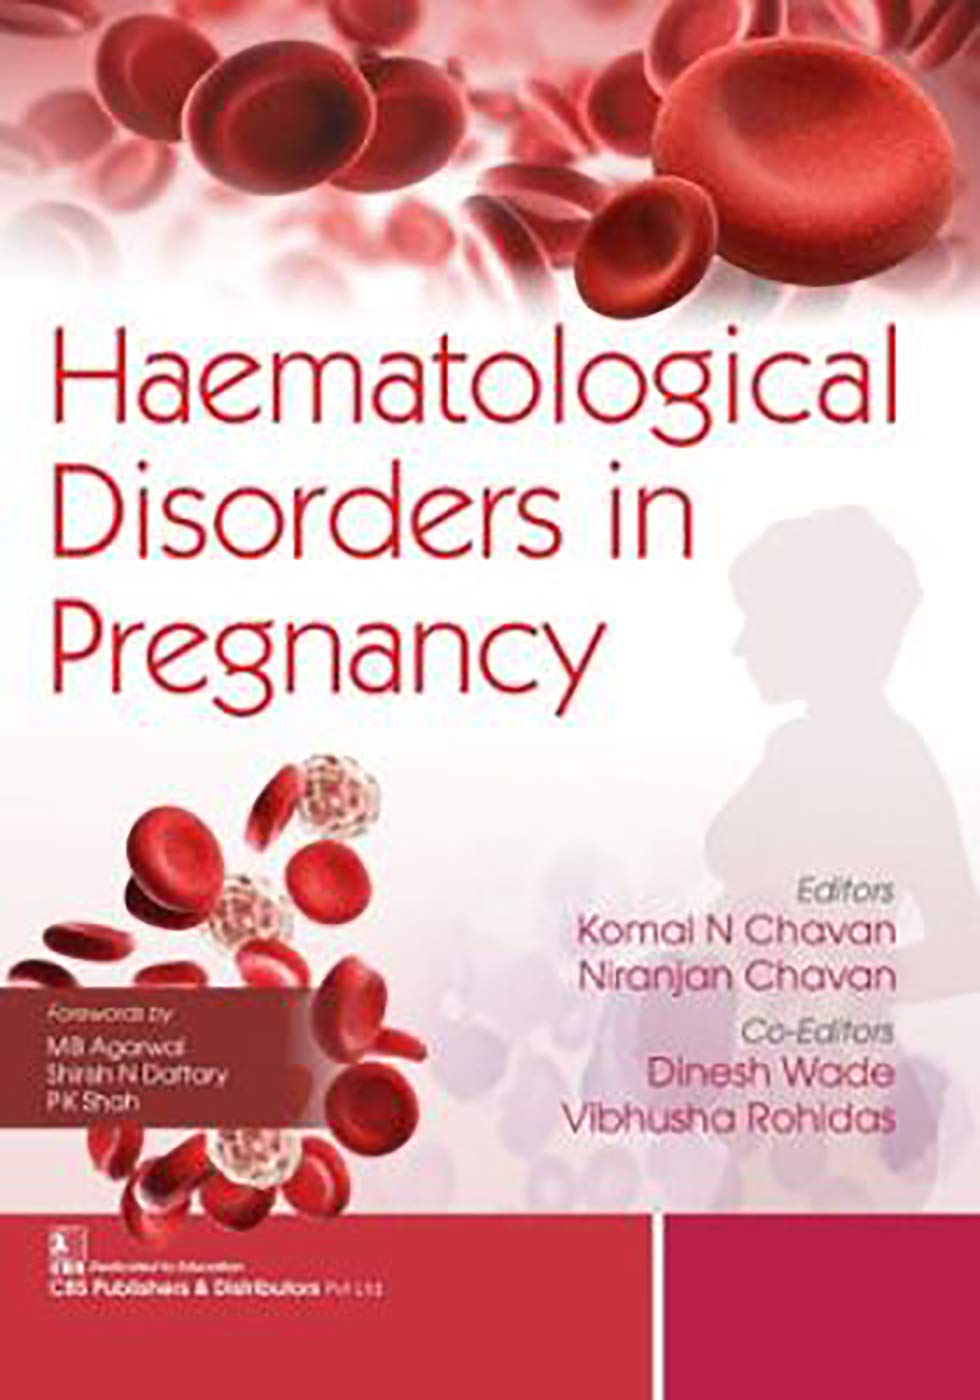 Haematological Disorders in Pregnency